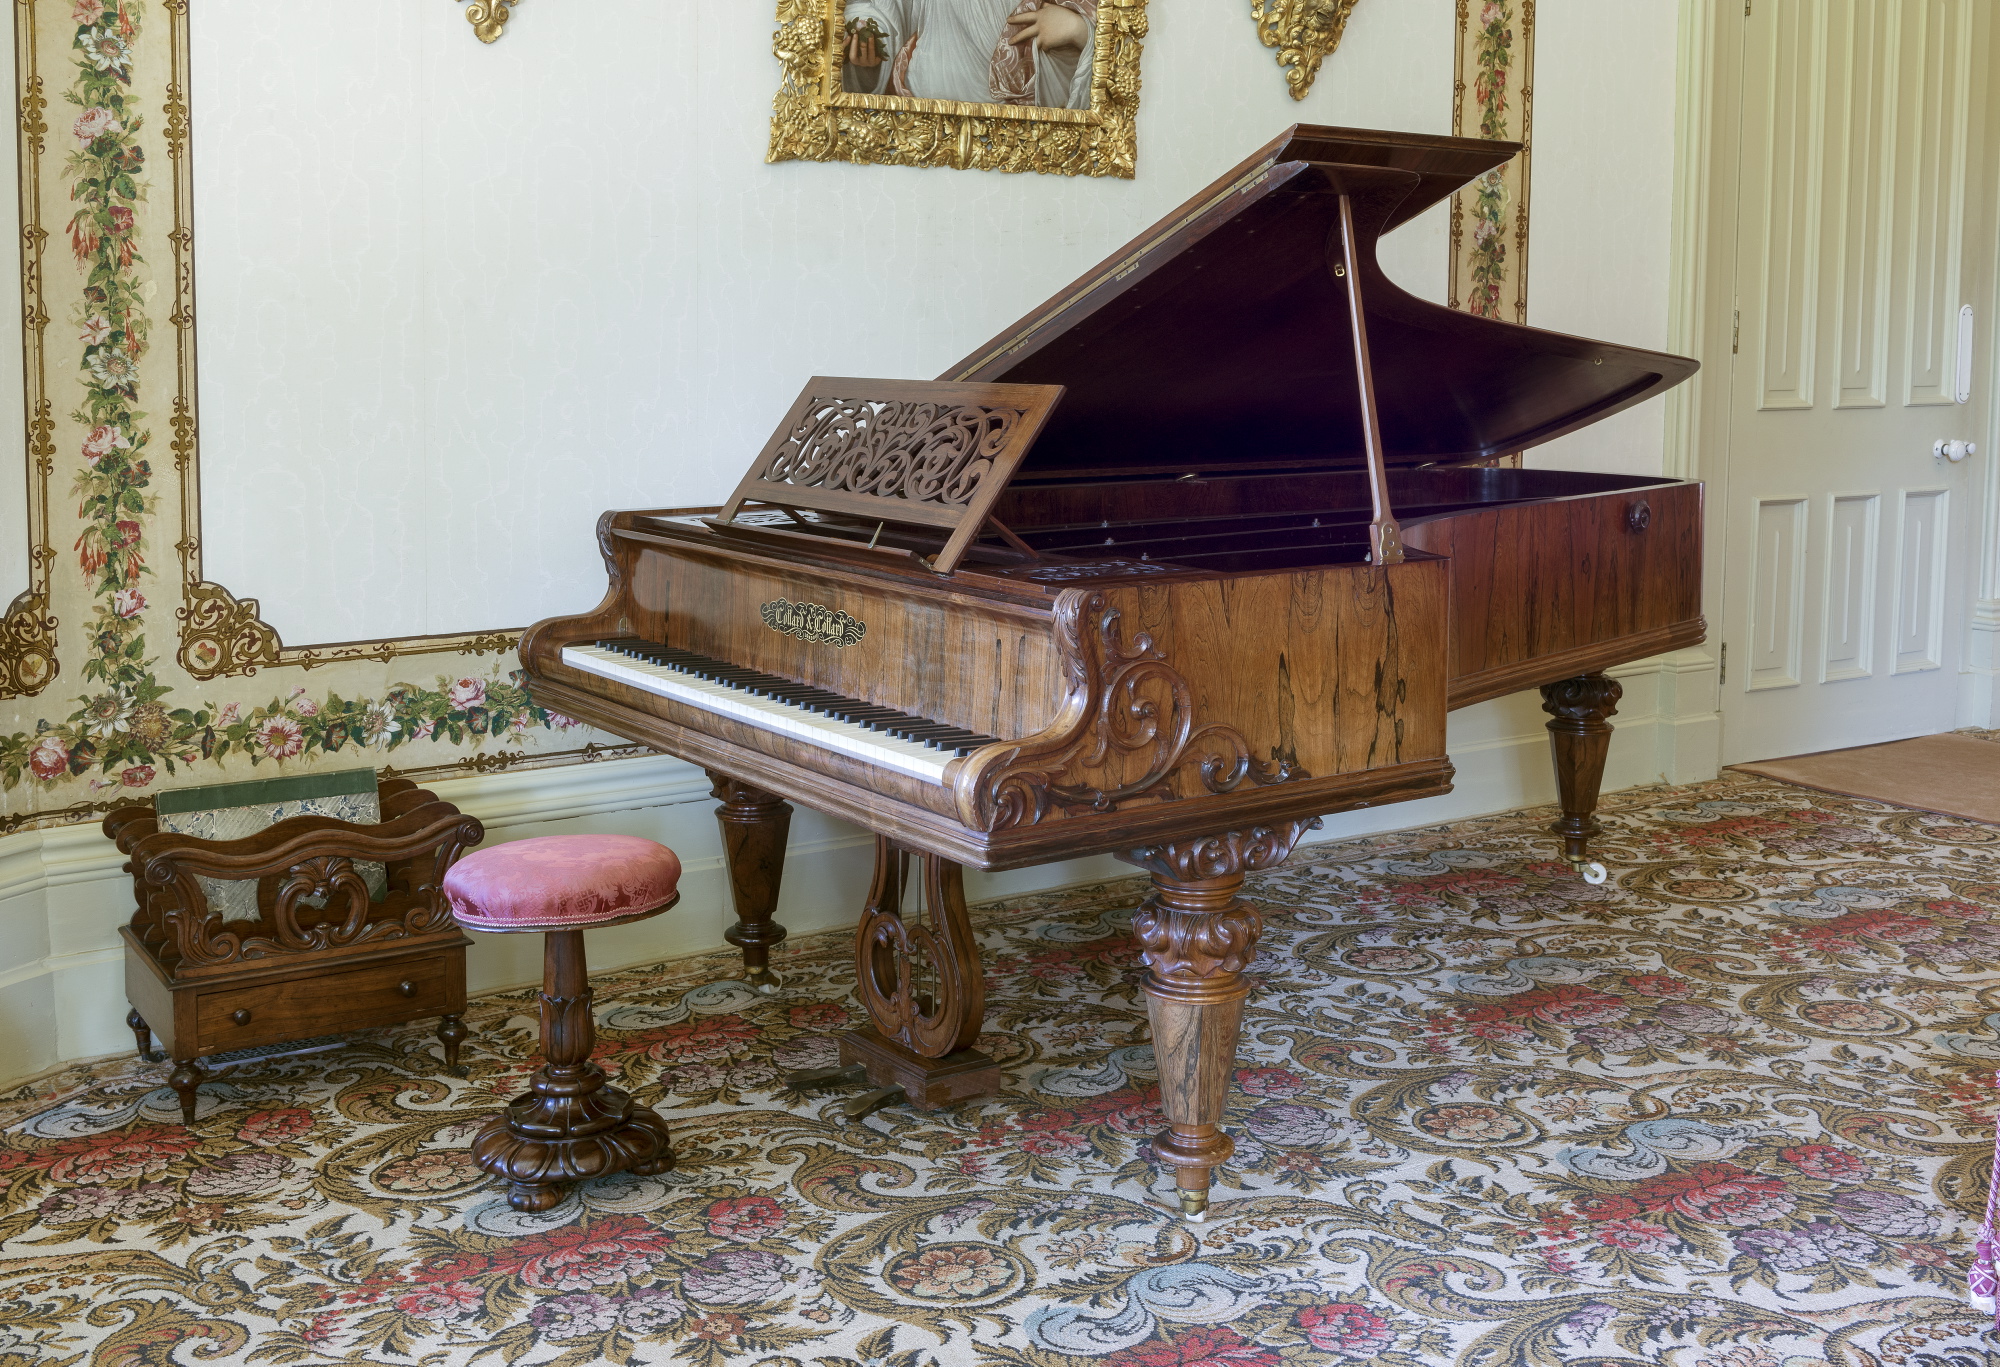 Collard and Collard grand, c1863. Vaucluse House Collection, Sydney Living Museums. Photo (c) Rob Little / RLDI  